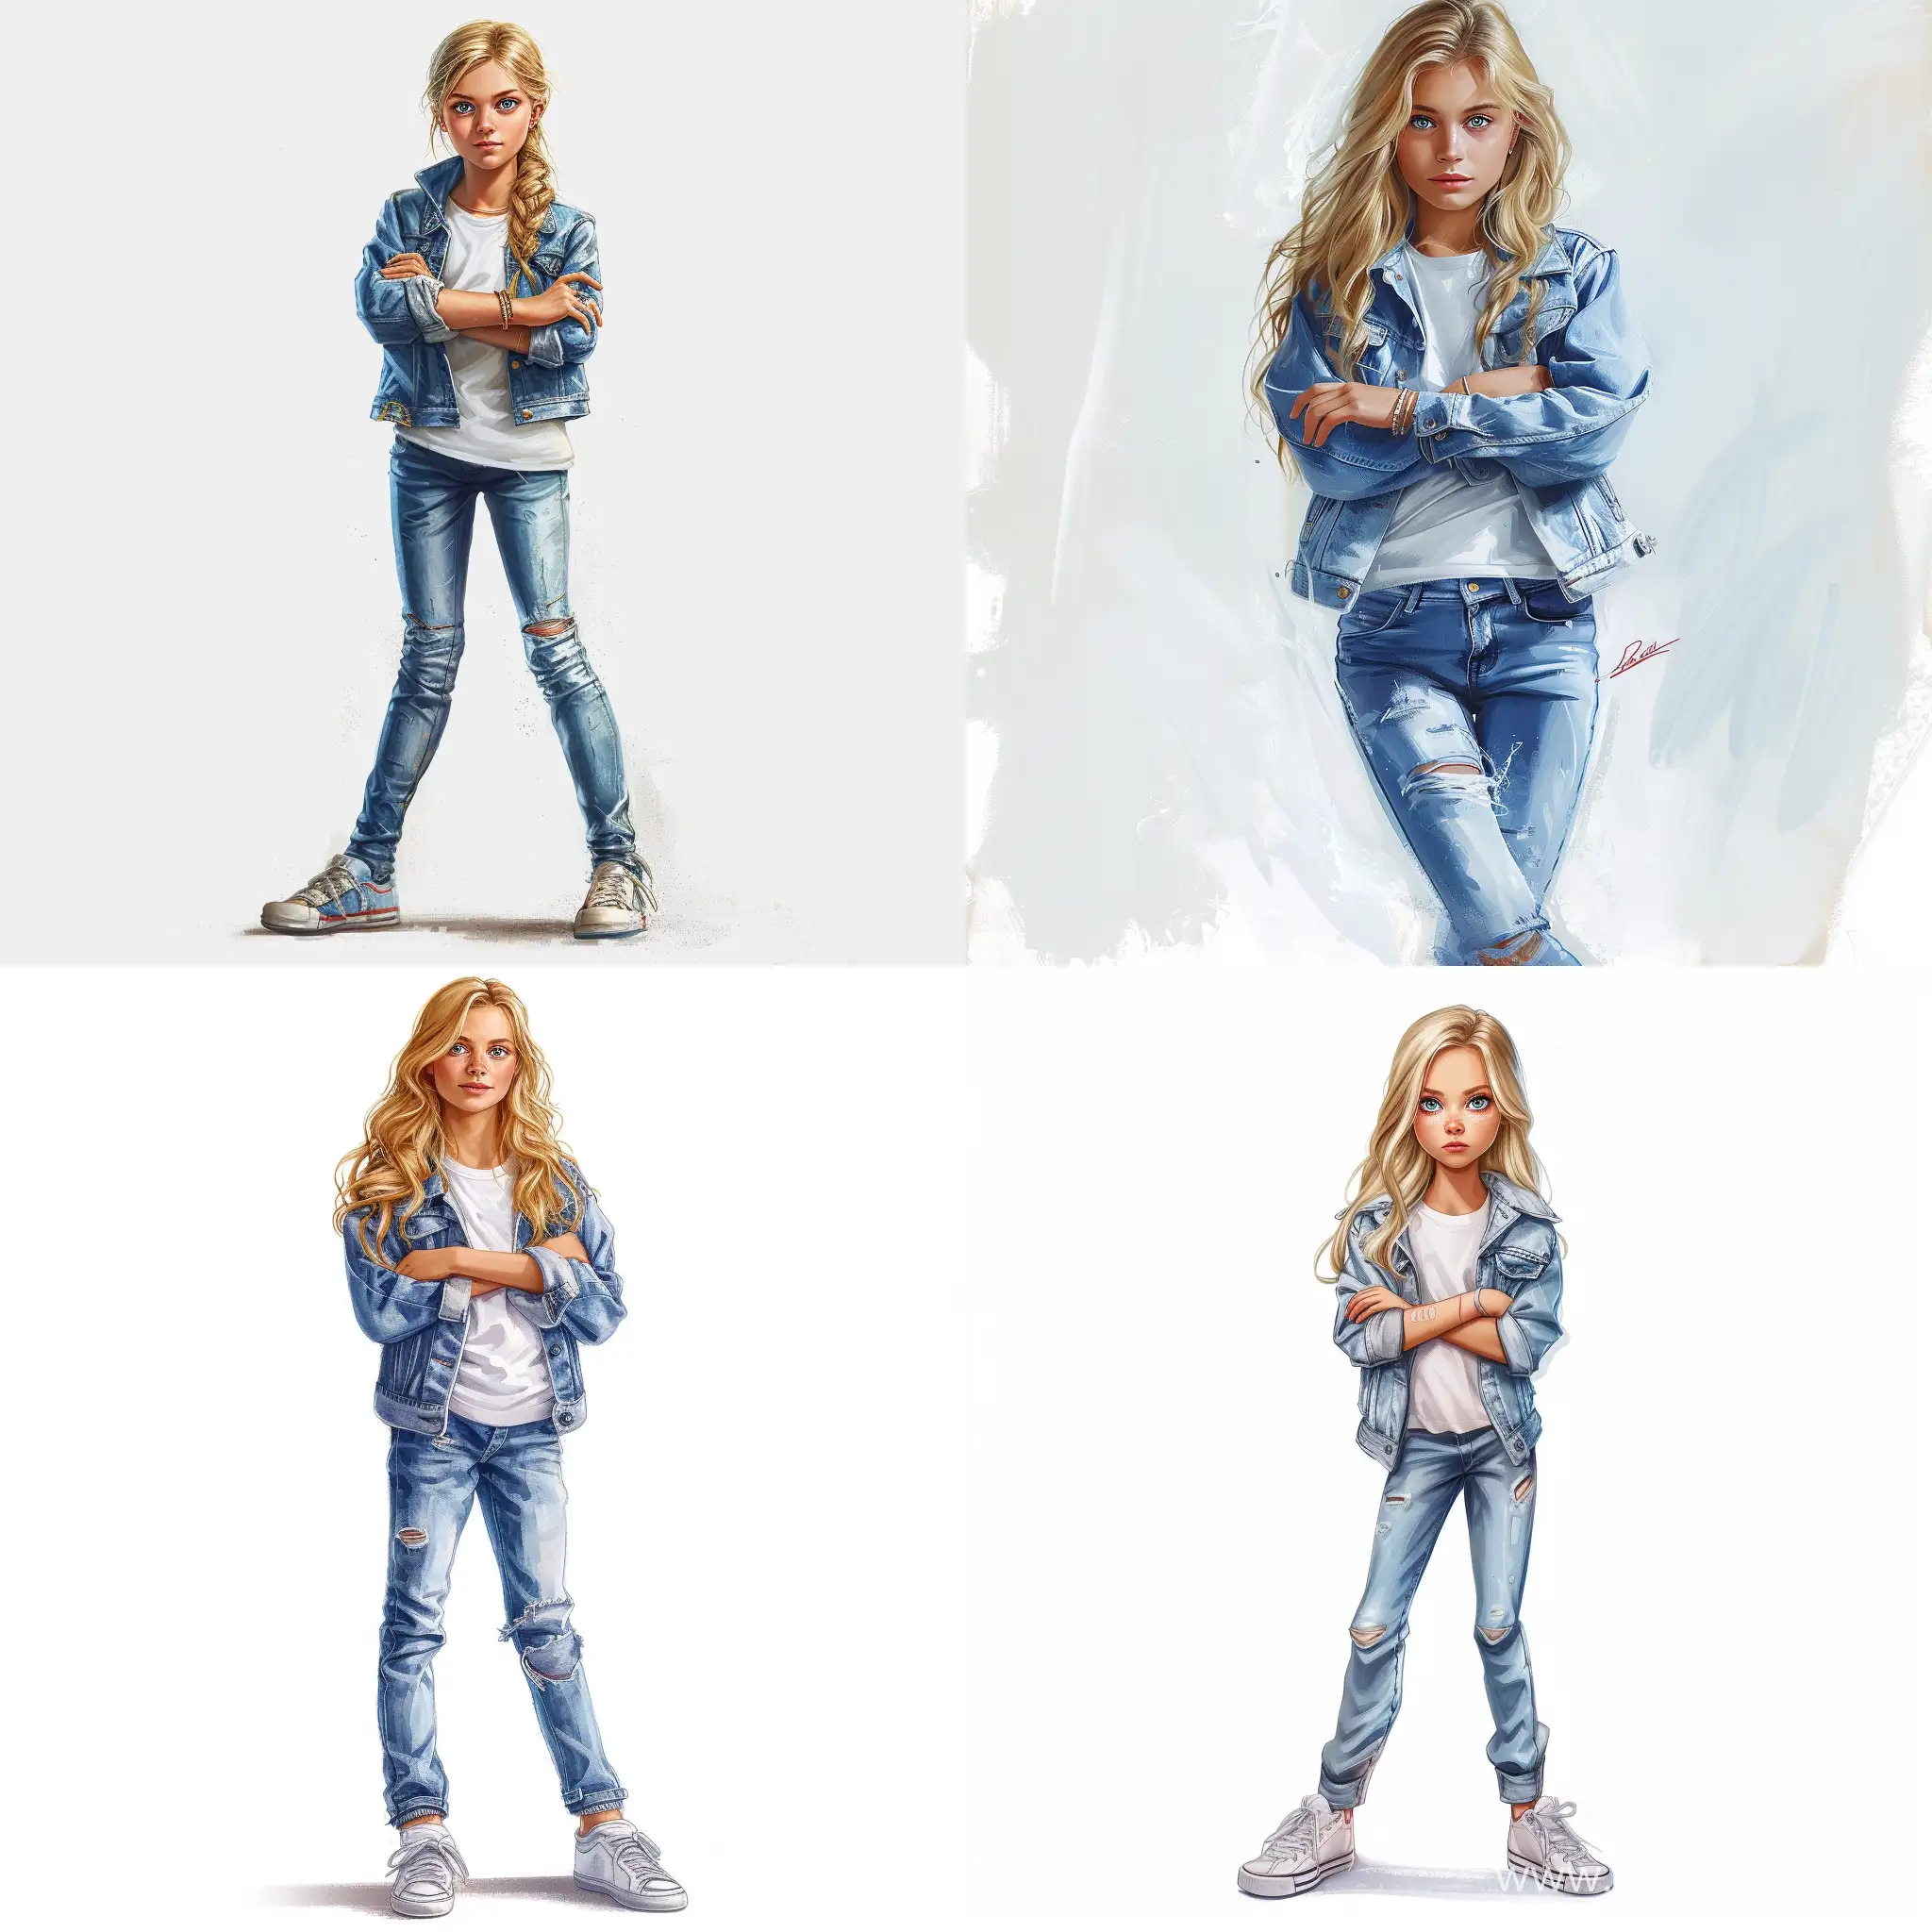 Stylish-Blonde-Teenager-with-Folded-Arms-in-HighQuality-Realistic-Art